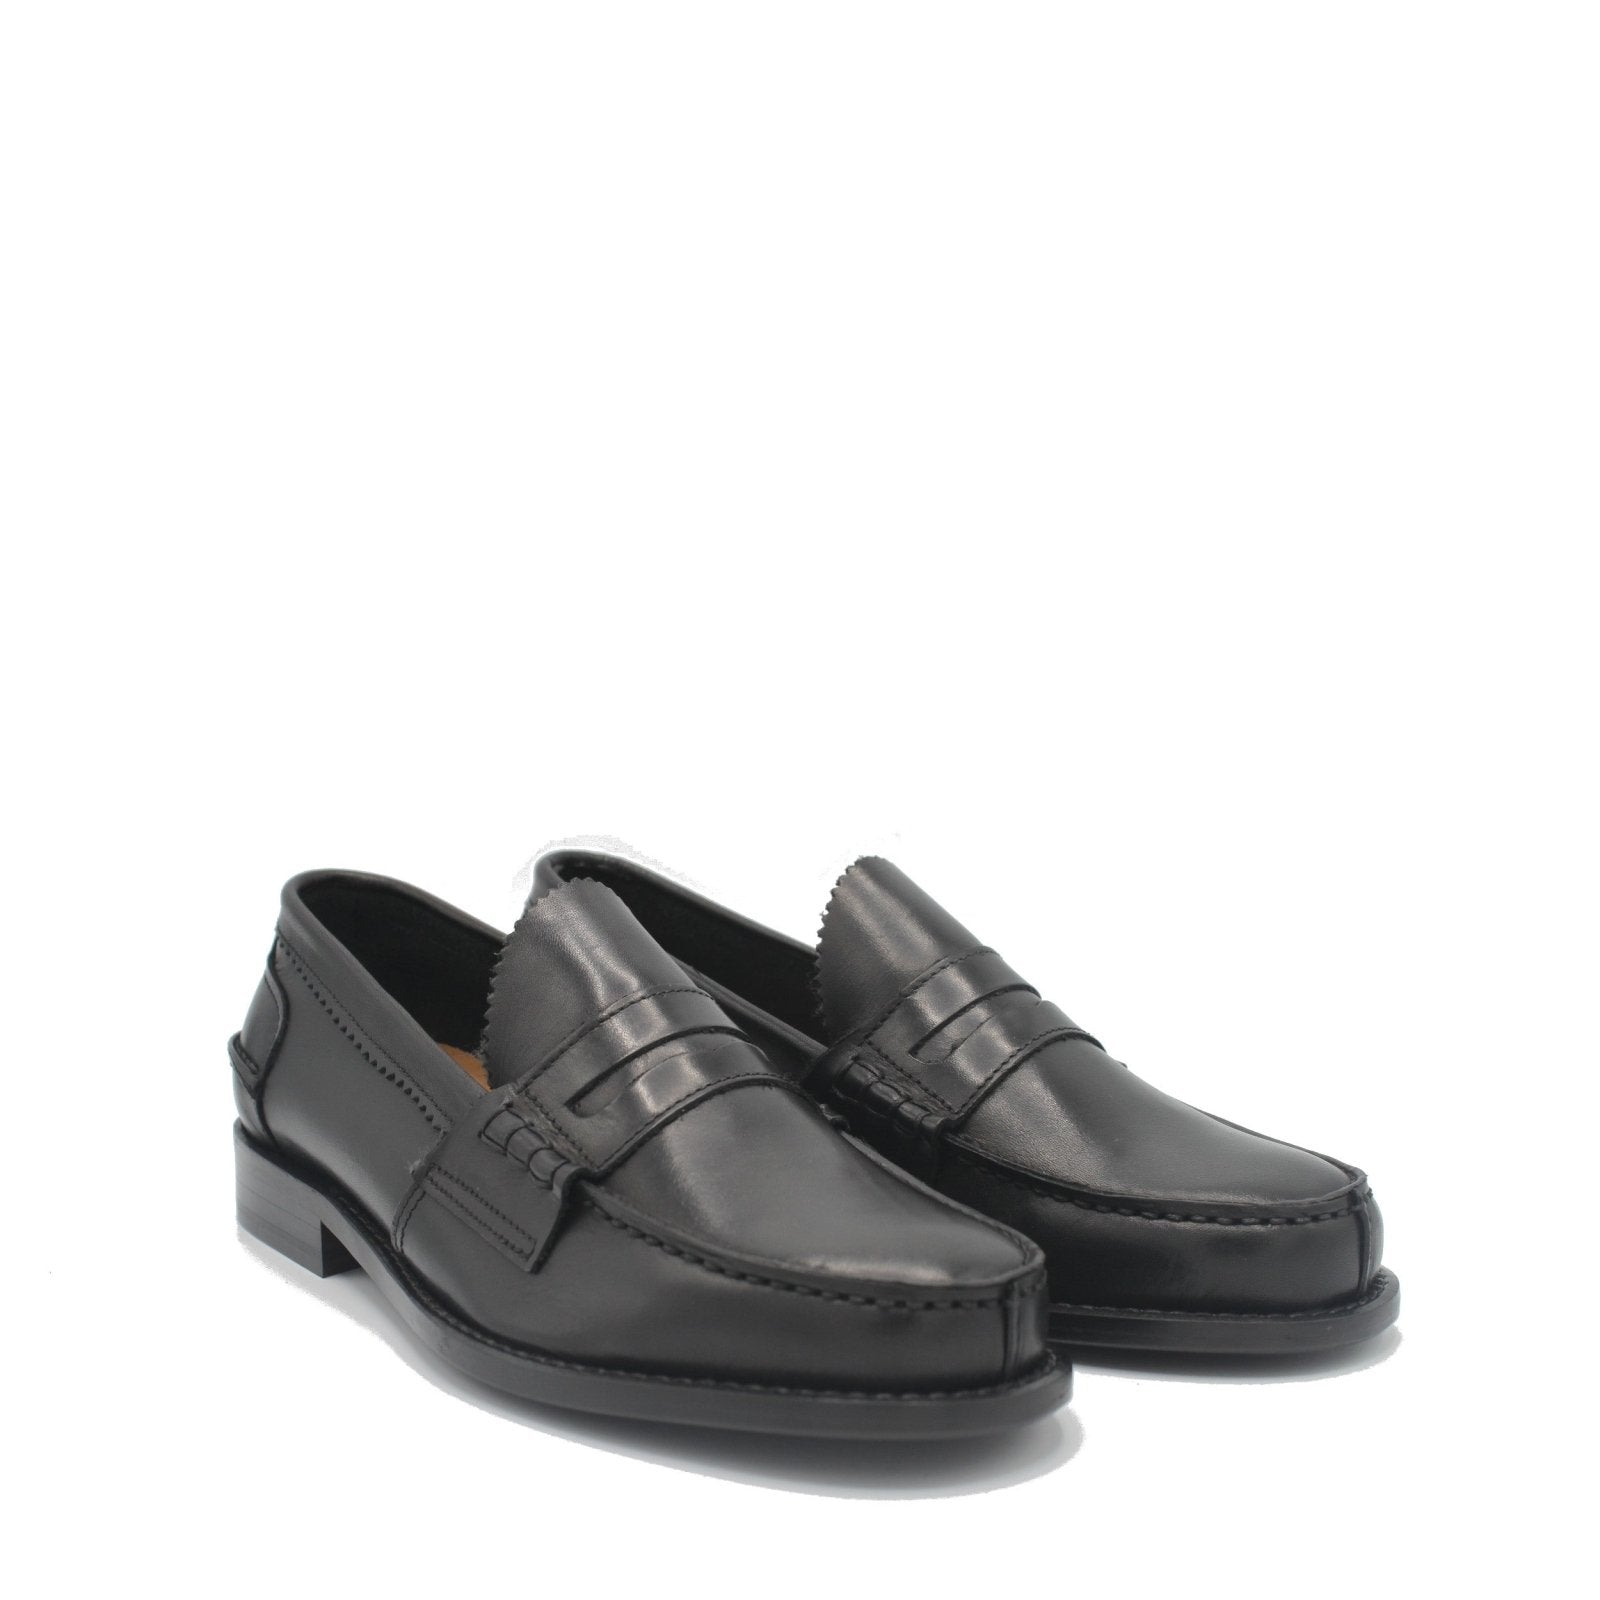 WOMAN PENNY LOAFER BLACK LEATHER - Saxone of Scotland